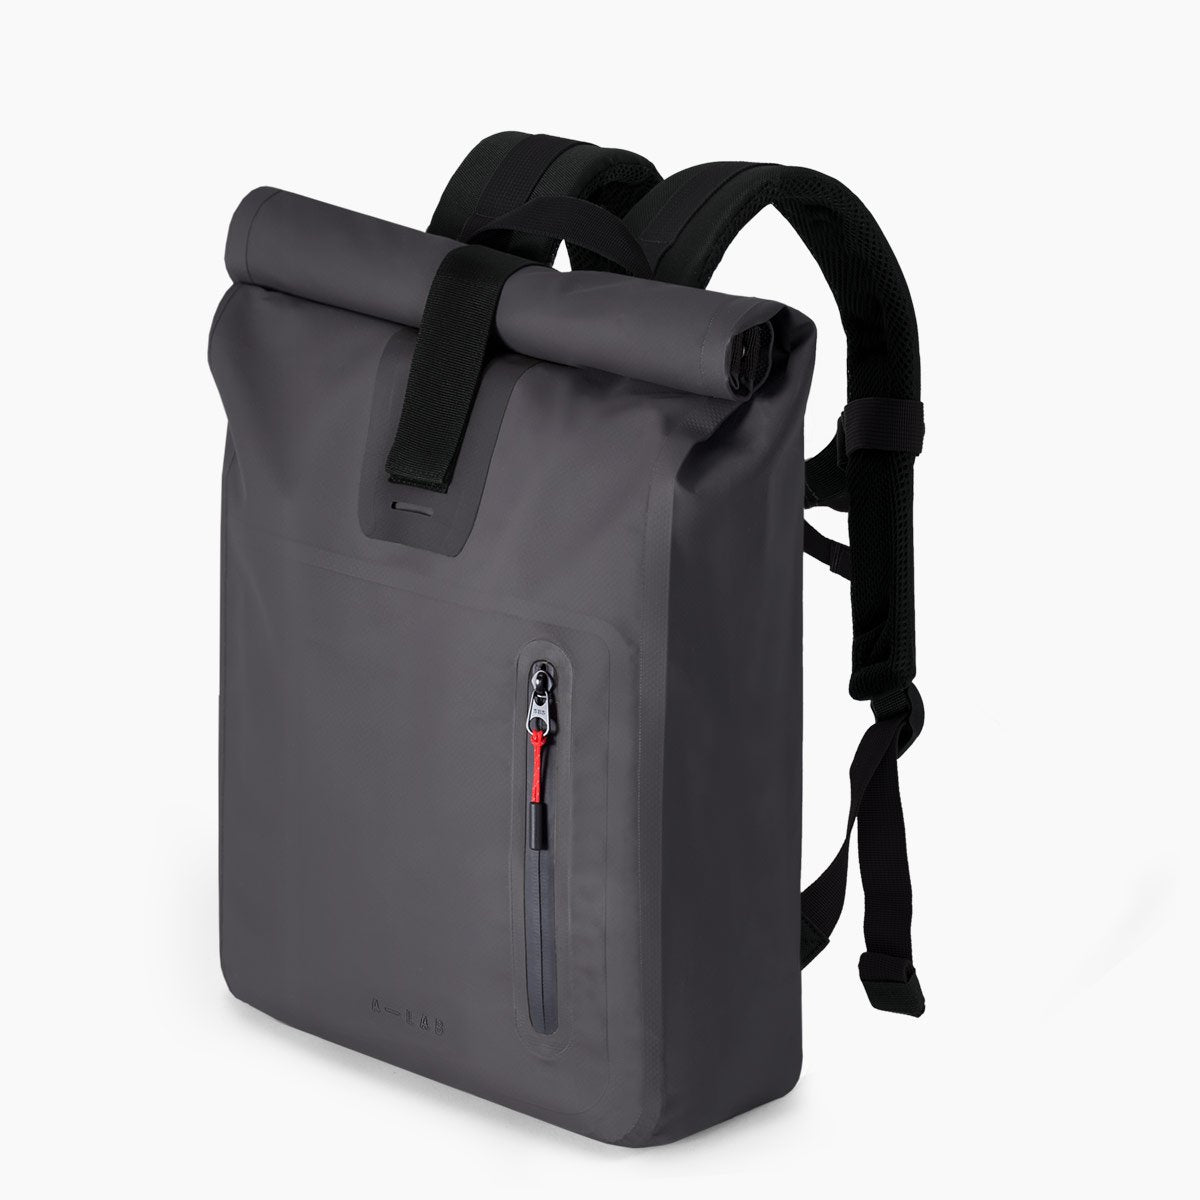 Model A • Backpack • Small • Black